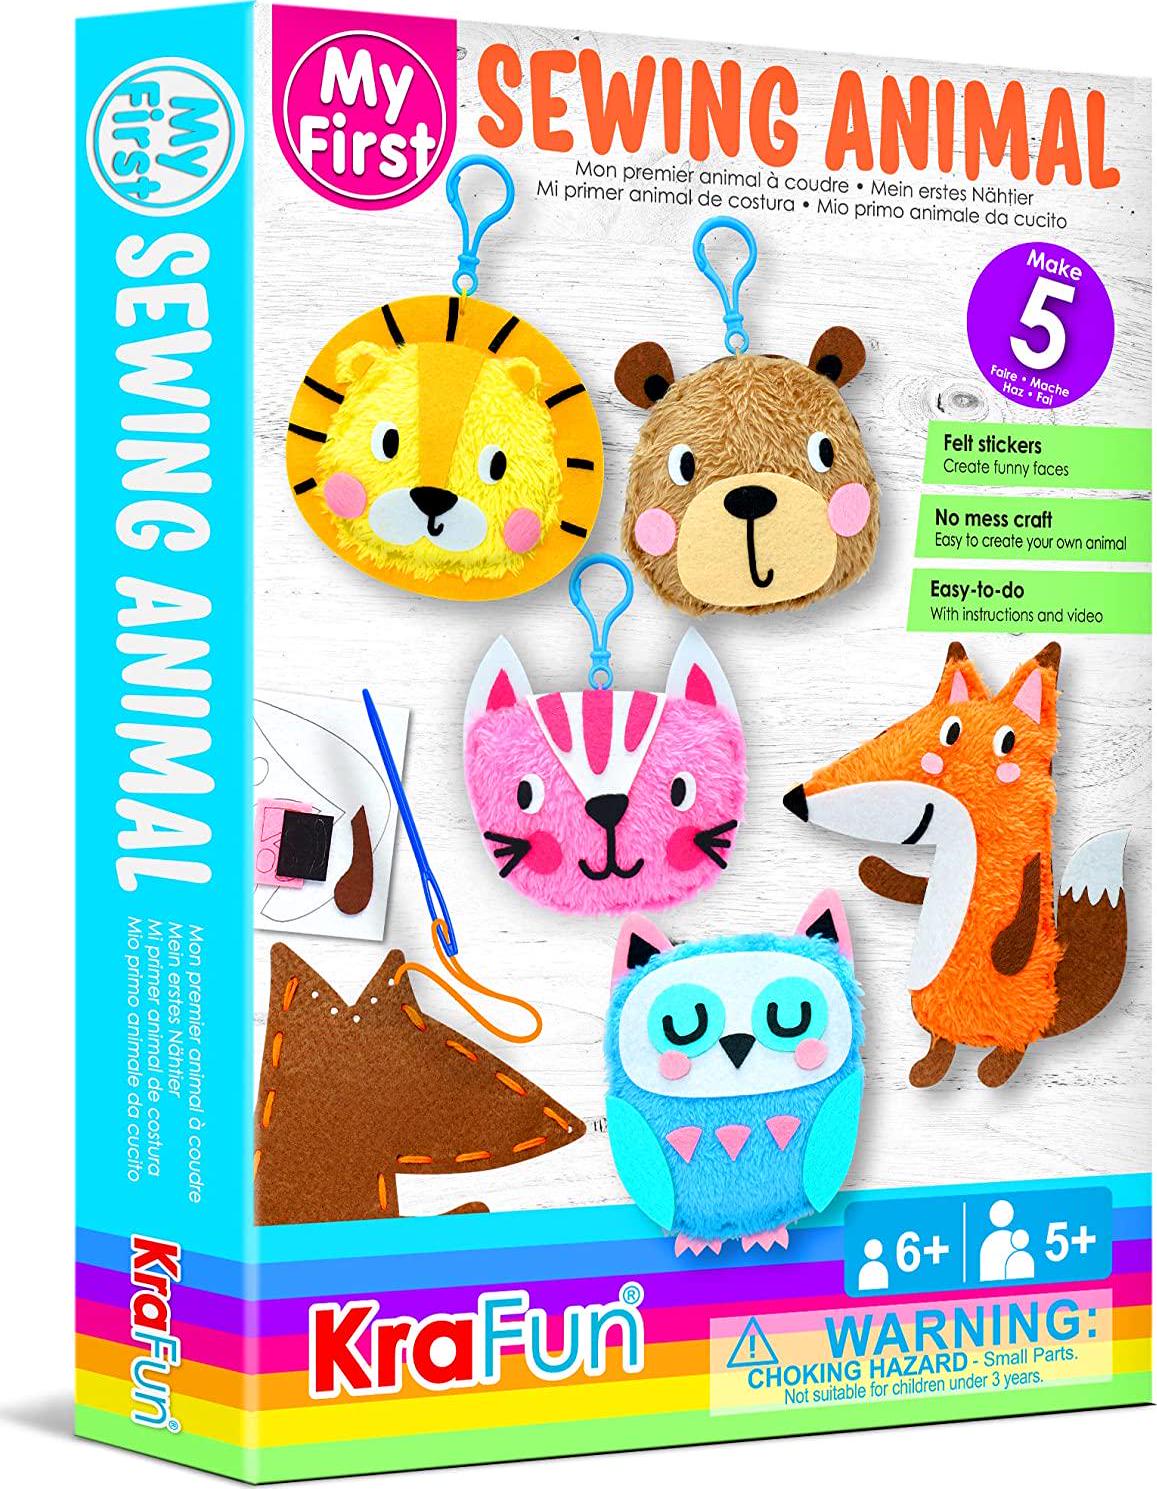 KRAFUN, KRAFUN My First Sewing Animal for Kids, Beginner Art and Craft, Includes 5 Easy Projects Stuffed Stitch Animal Dolls, Keyring Charms, Instructions and Felt Materials for Learn to Sew, Embroidery Skills